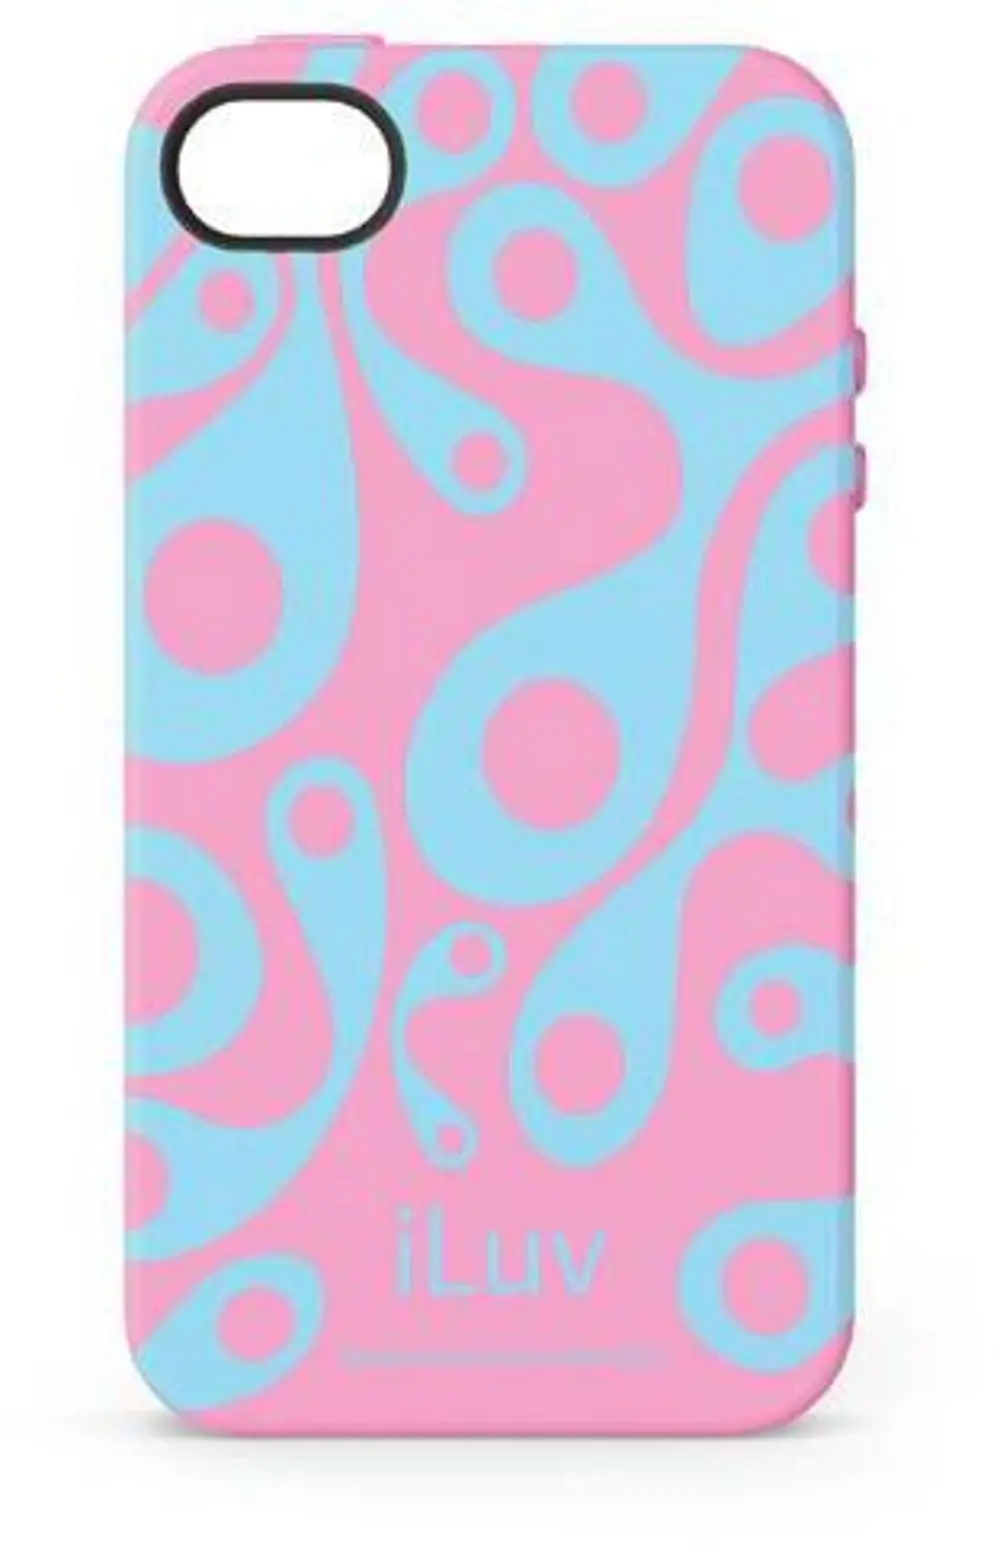 ICA7T309PNK iLuv Aurora Glow in the Dark case for iPhone 5/5s - Pink-1